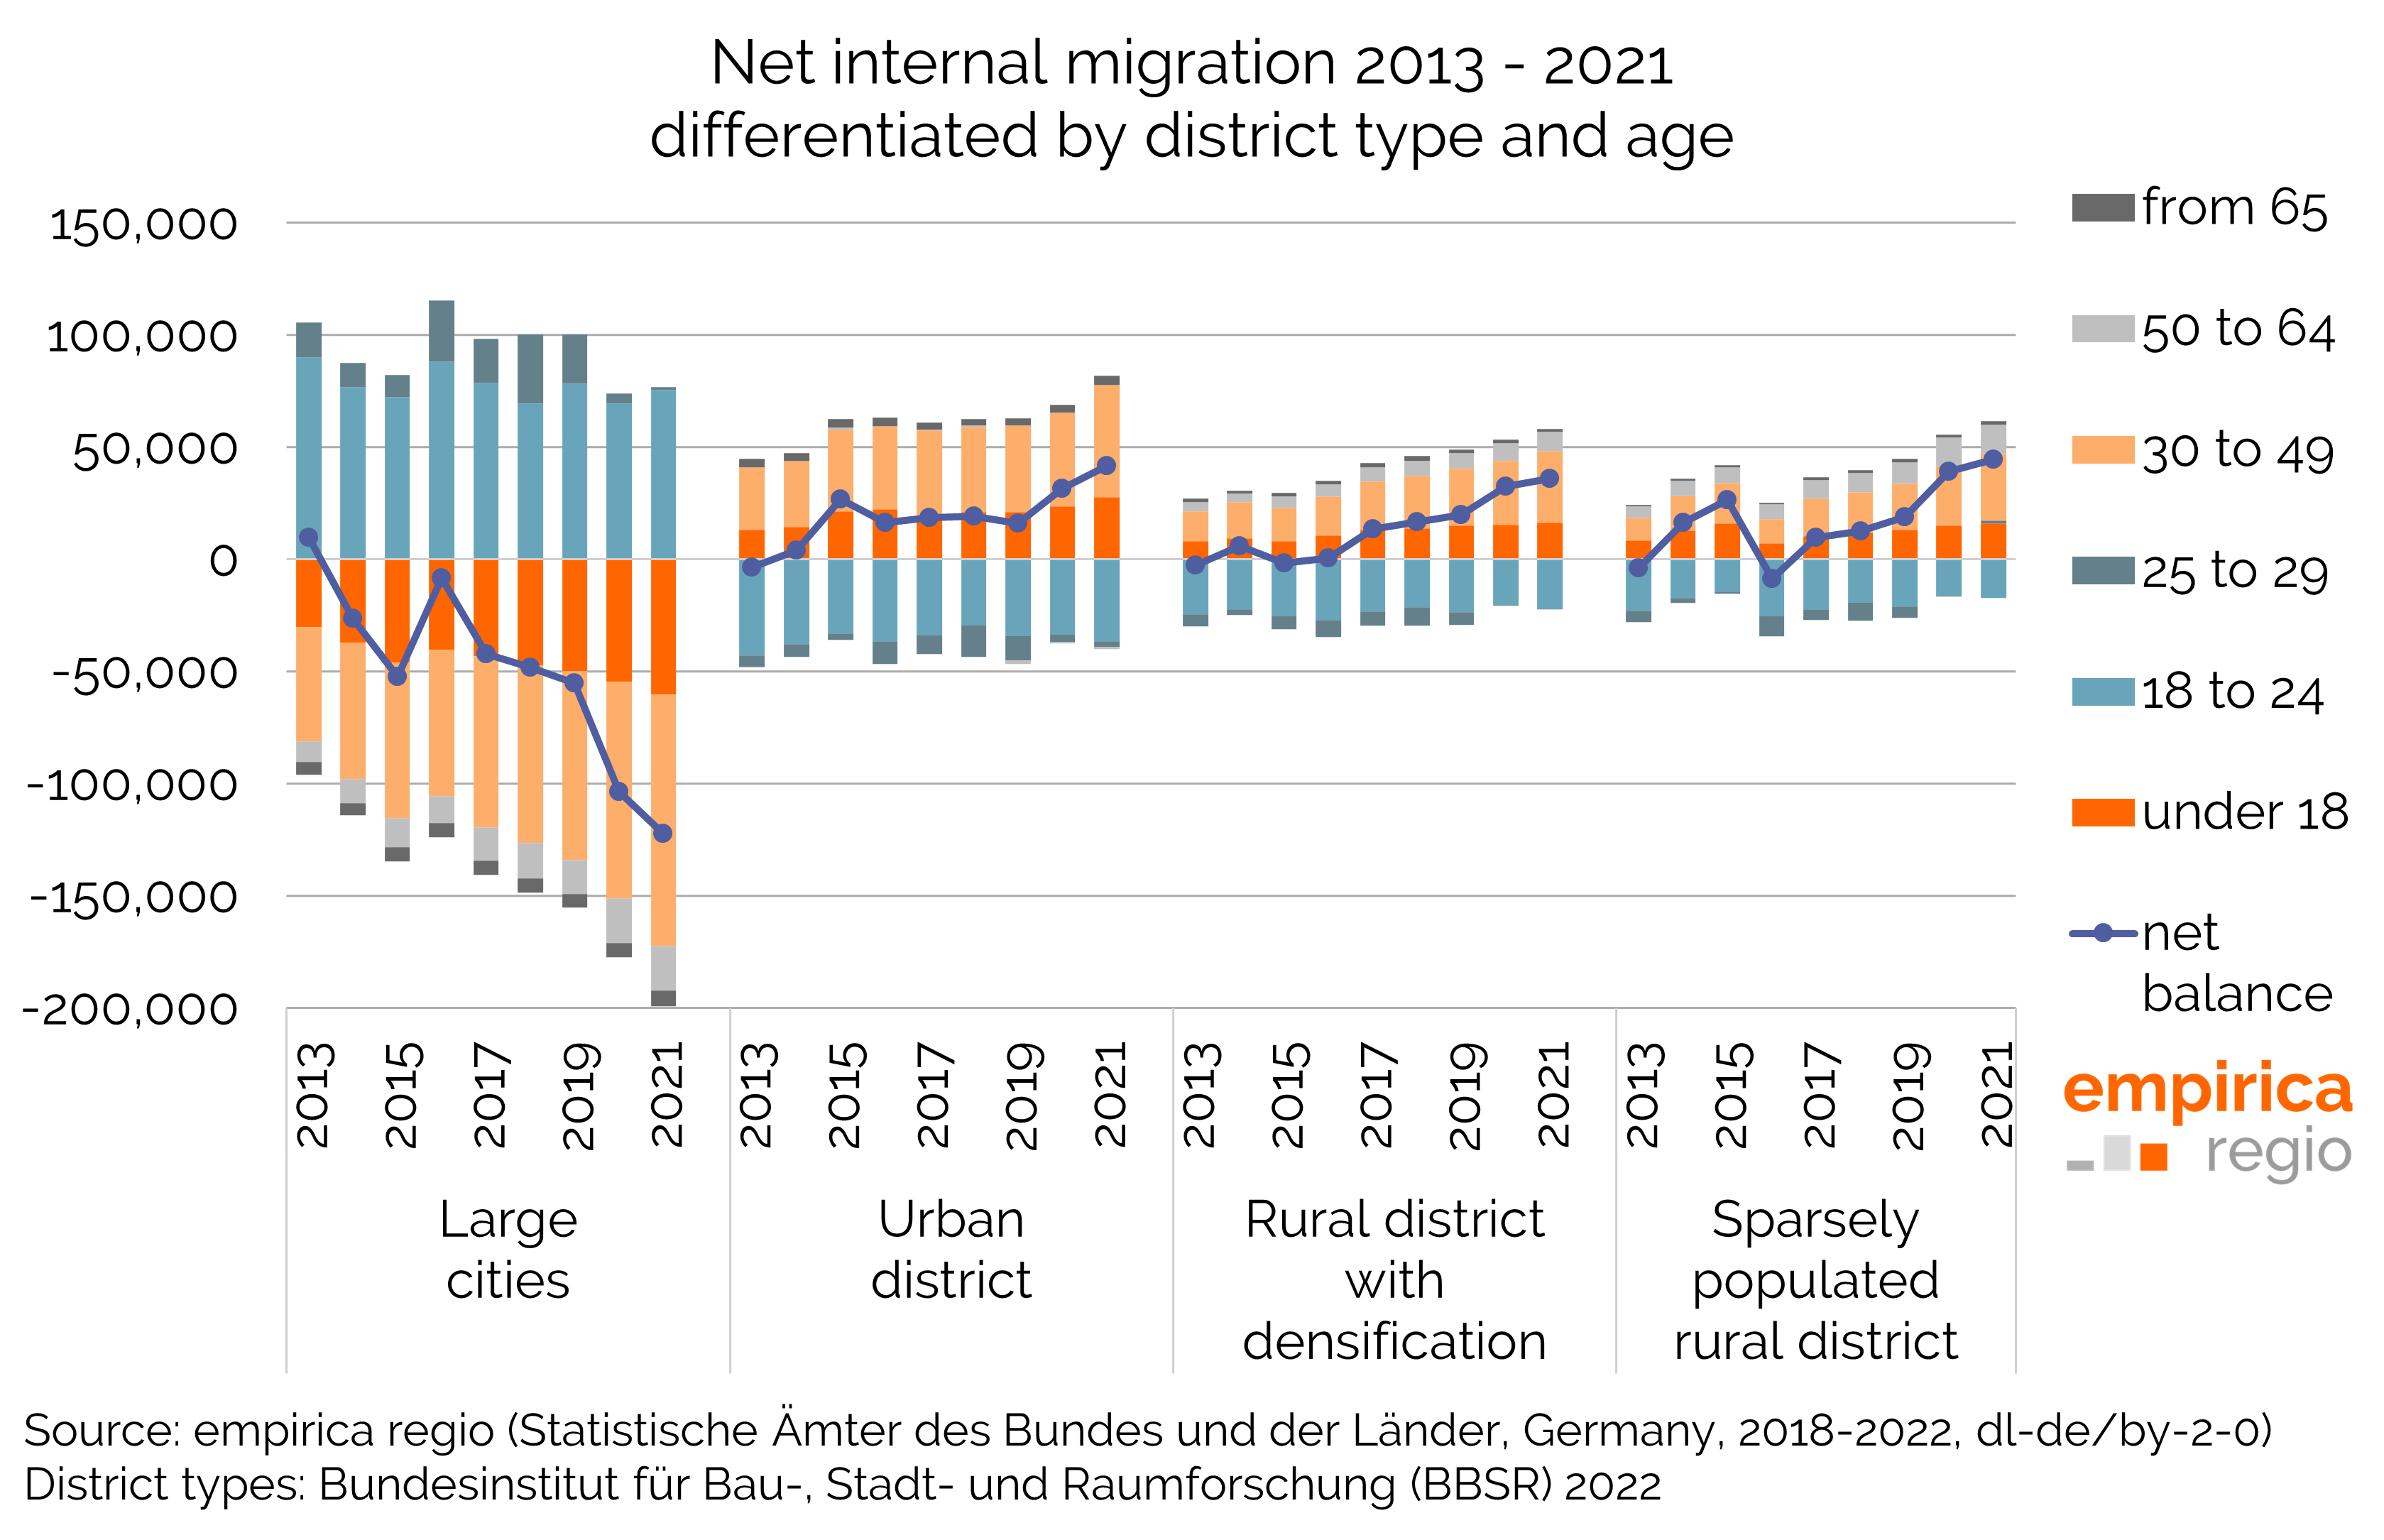 Net internal migration 2013 - 2021 differentiated by district type and age